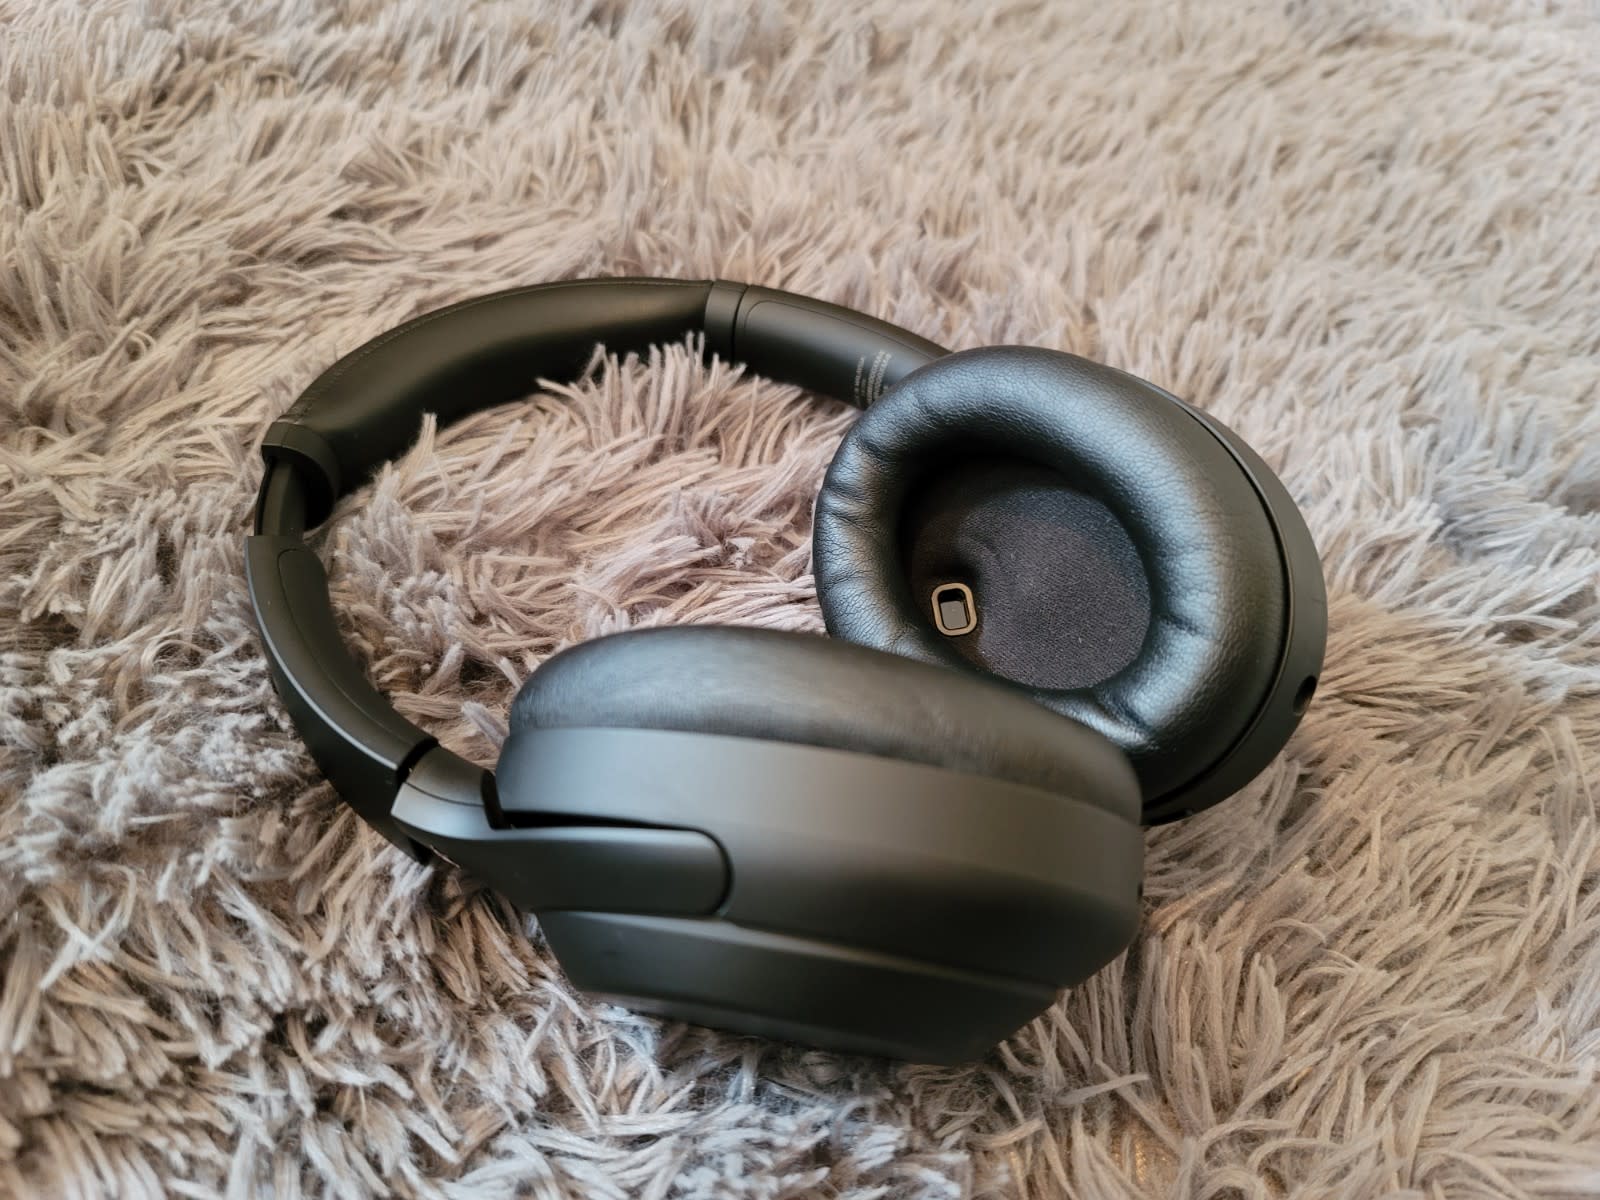 Sony WH1000XM4 headphone review